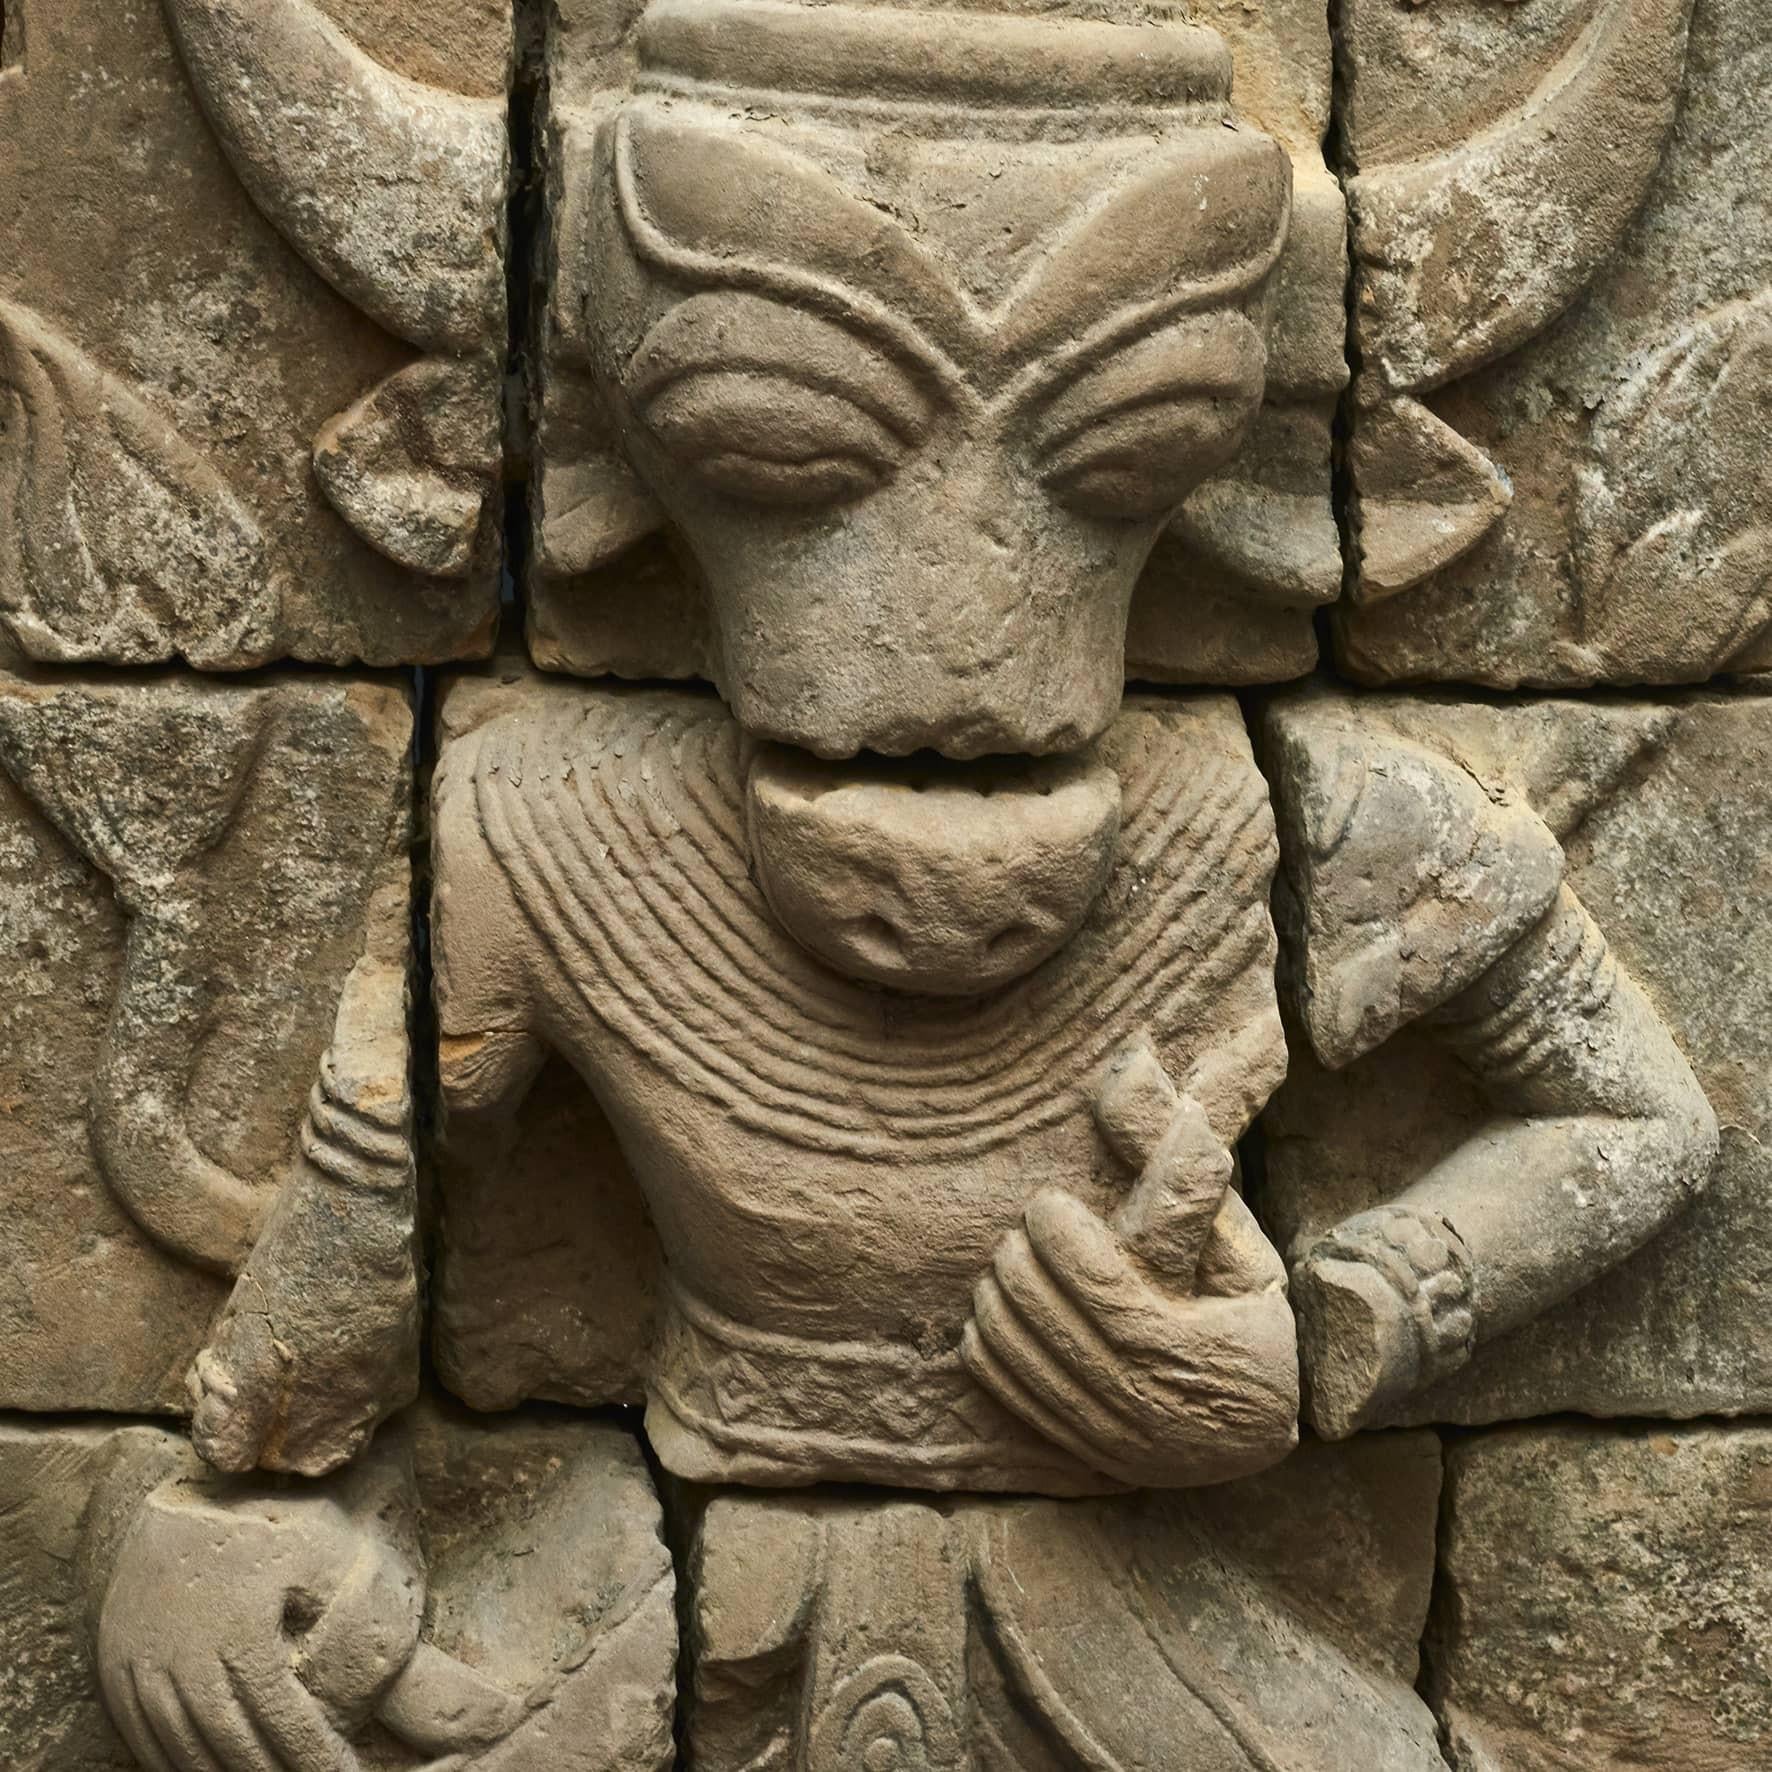 Hindu sandstone carving depicting Nandi God in human form.
 600-800 years old most likely older.
An exceptional sculpture carved in sandstone from temple in Arakan, Burma.
Original in 12 parts - in the temple, there have most likely been